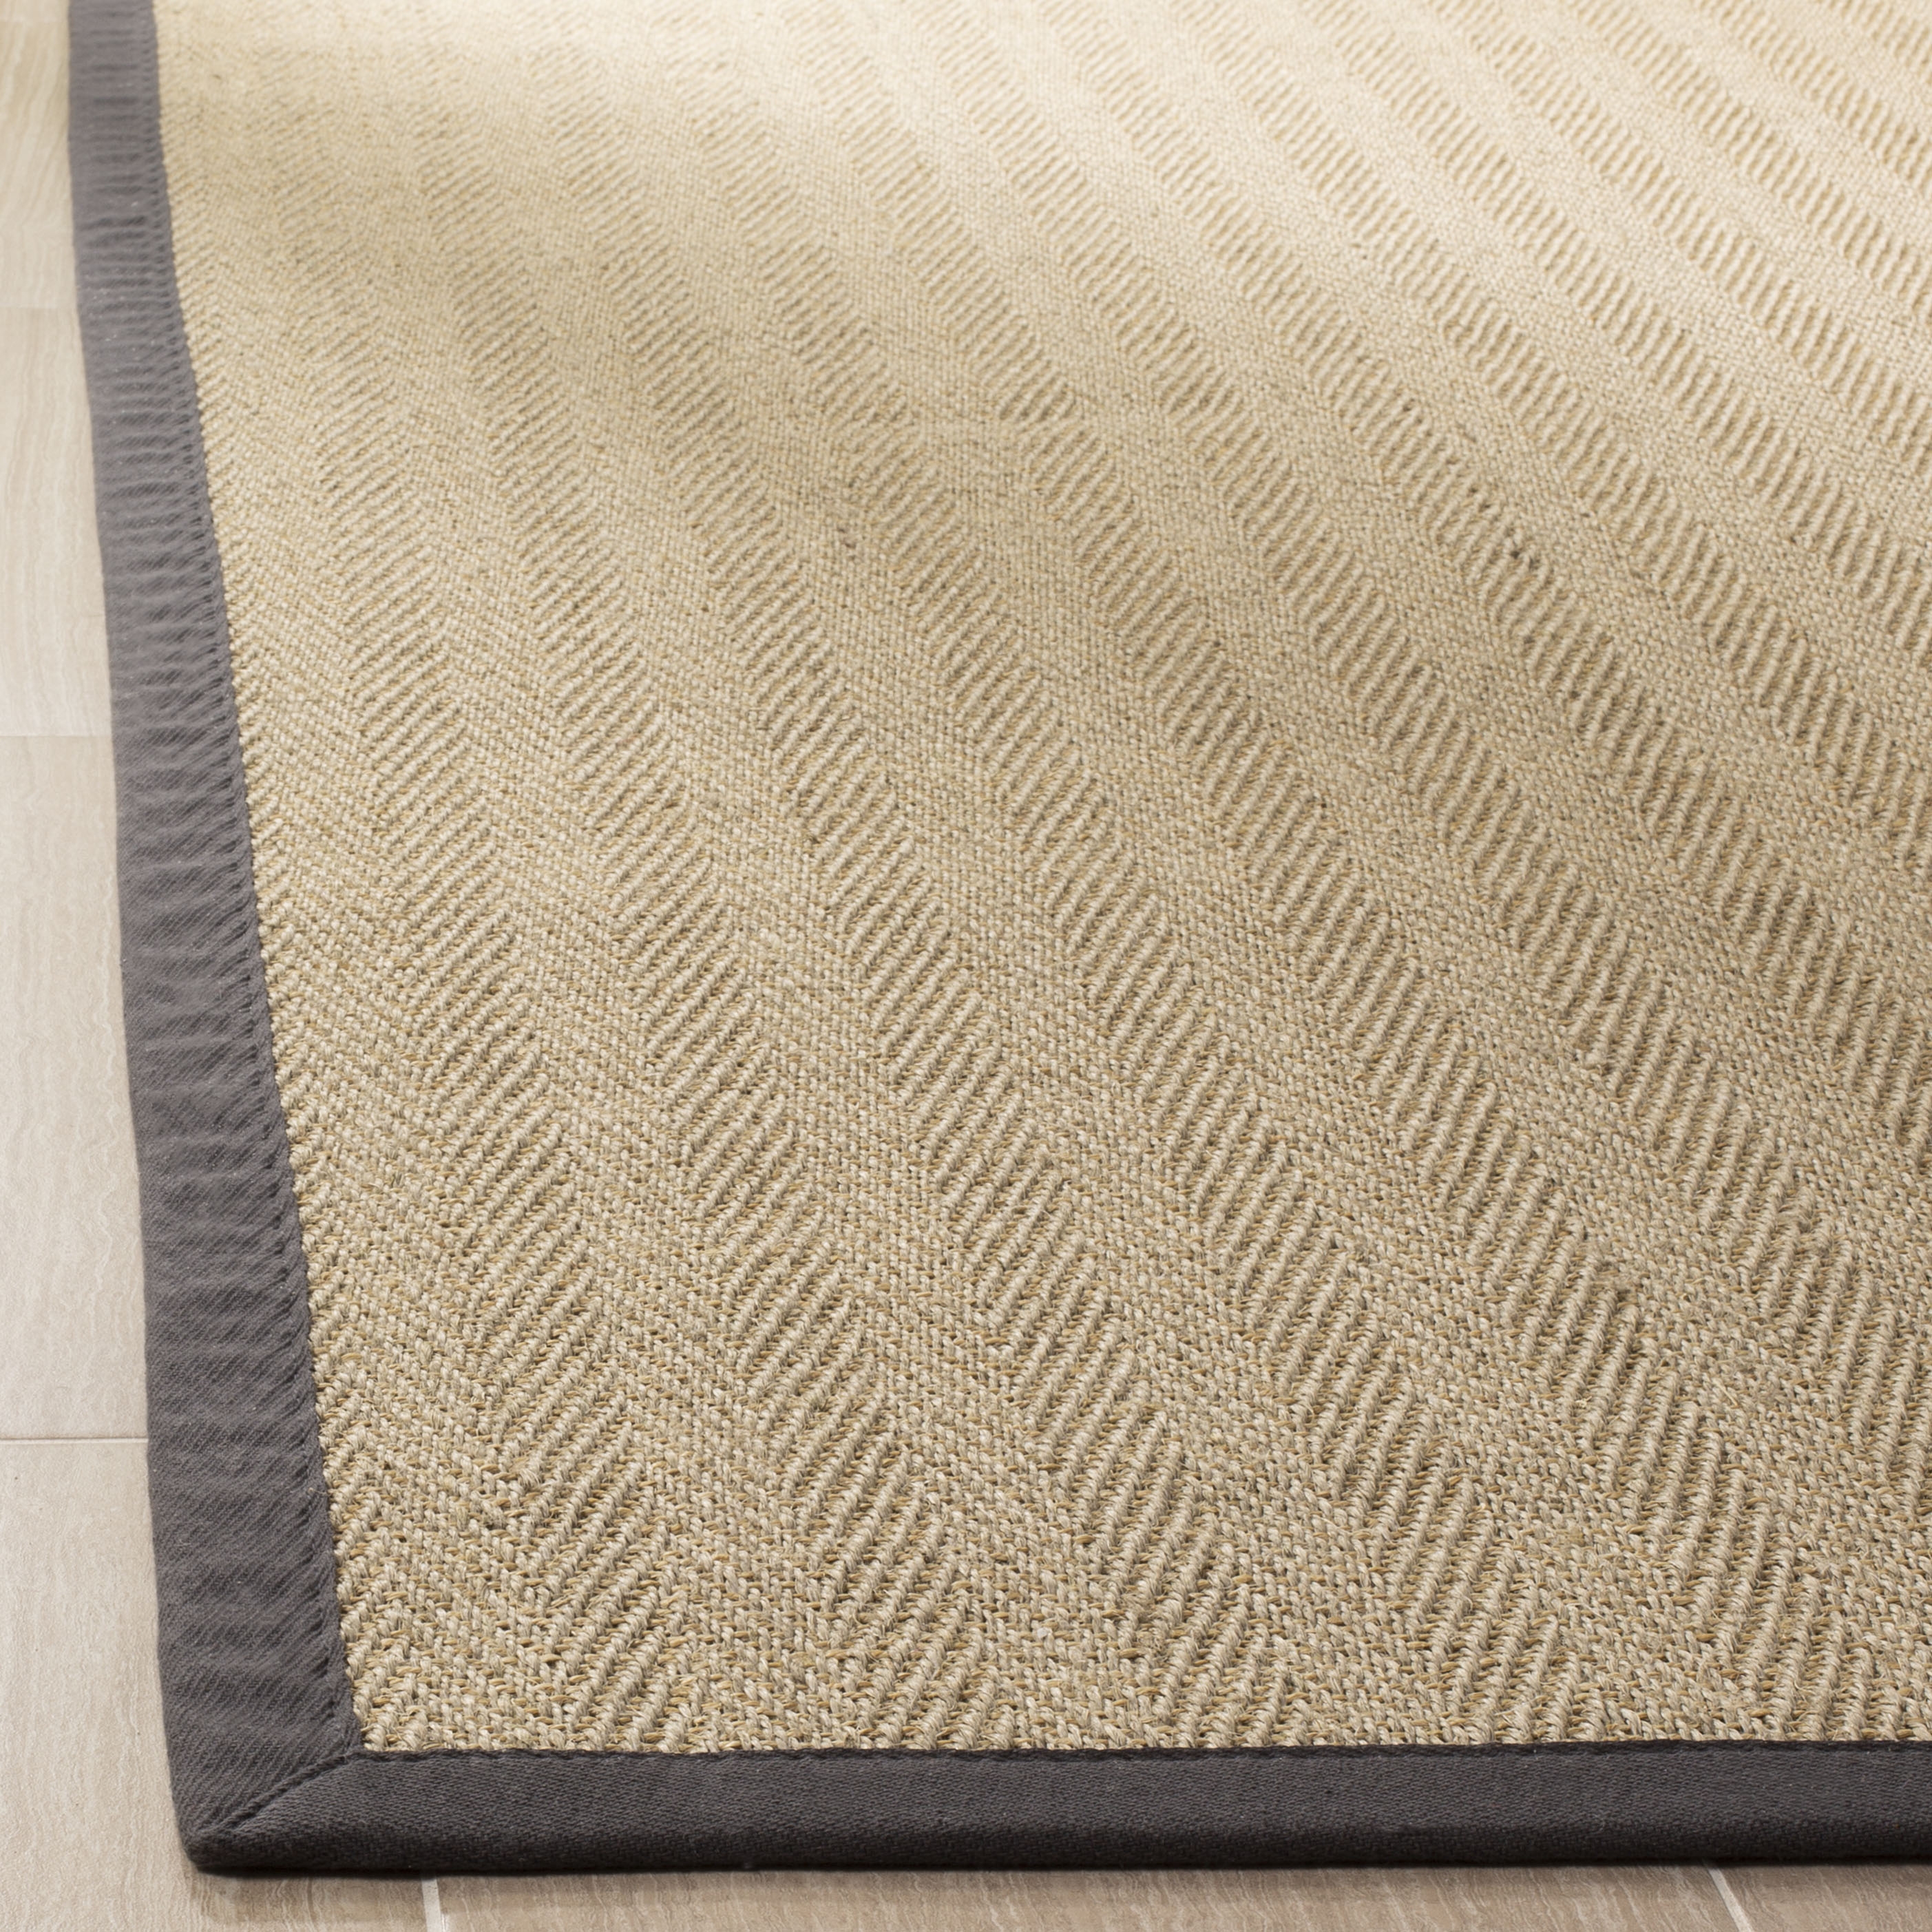 Arlo Home Woven Area Rug, NF134A, Natural/Grey,  3' X 5' - Image 1